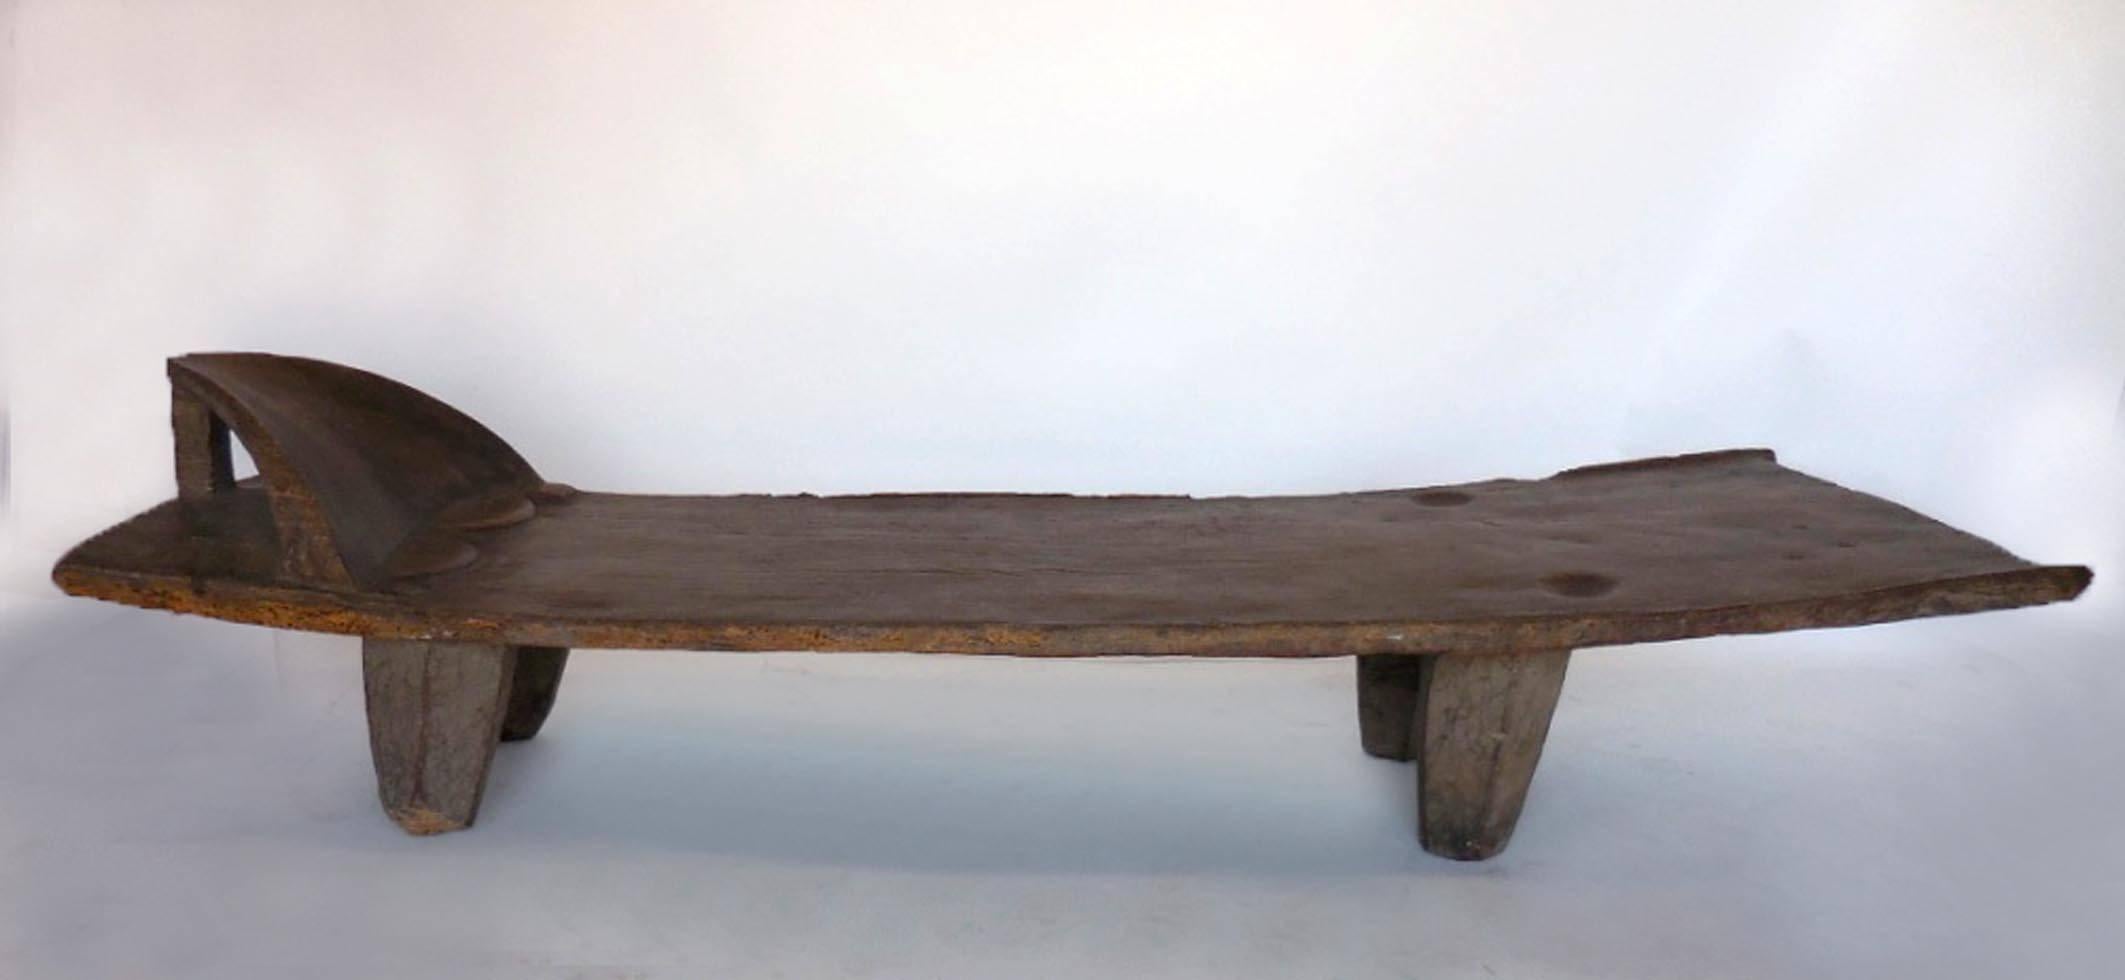 African antique daybed from the Sinufo tribe in Mali. Top is carved from one piece of wood. Hand hewn, beautiful patina. Primitive modern piece.
Measures: 101.5 long x 27-31.5 wide 24.5 high. Seat is about 14.5 – 17″ H.